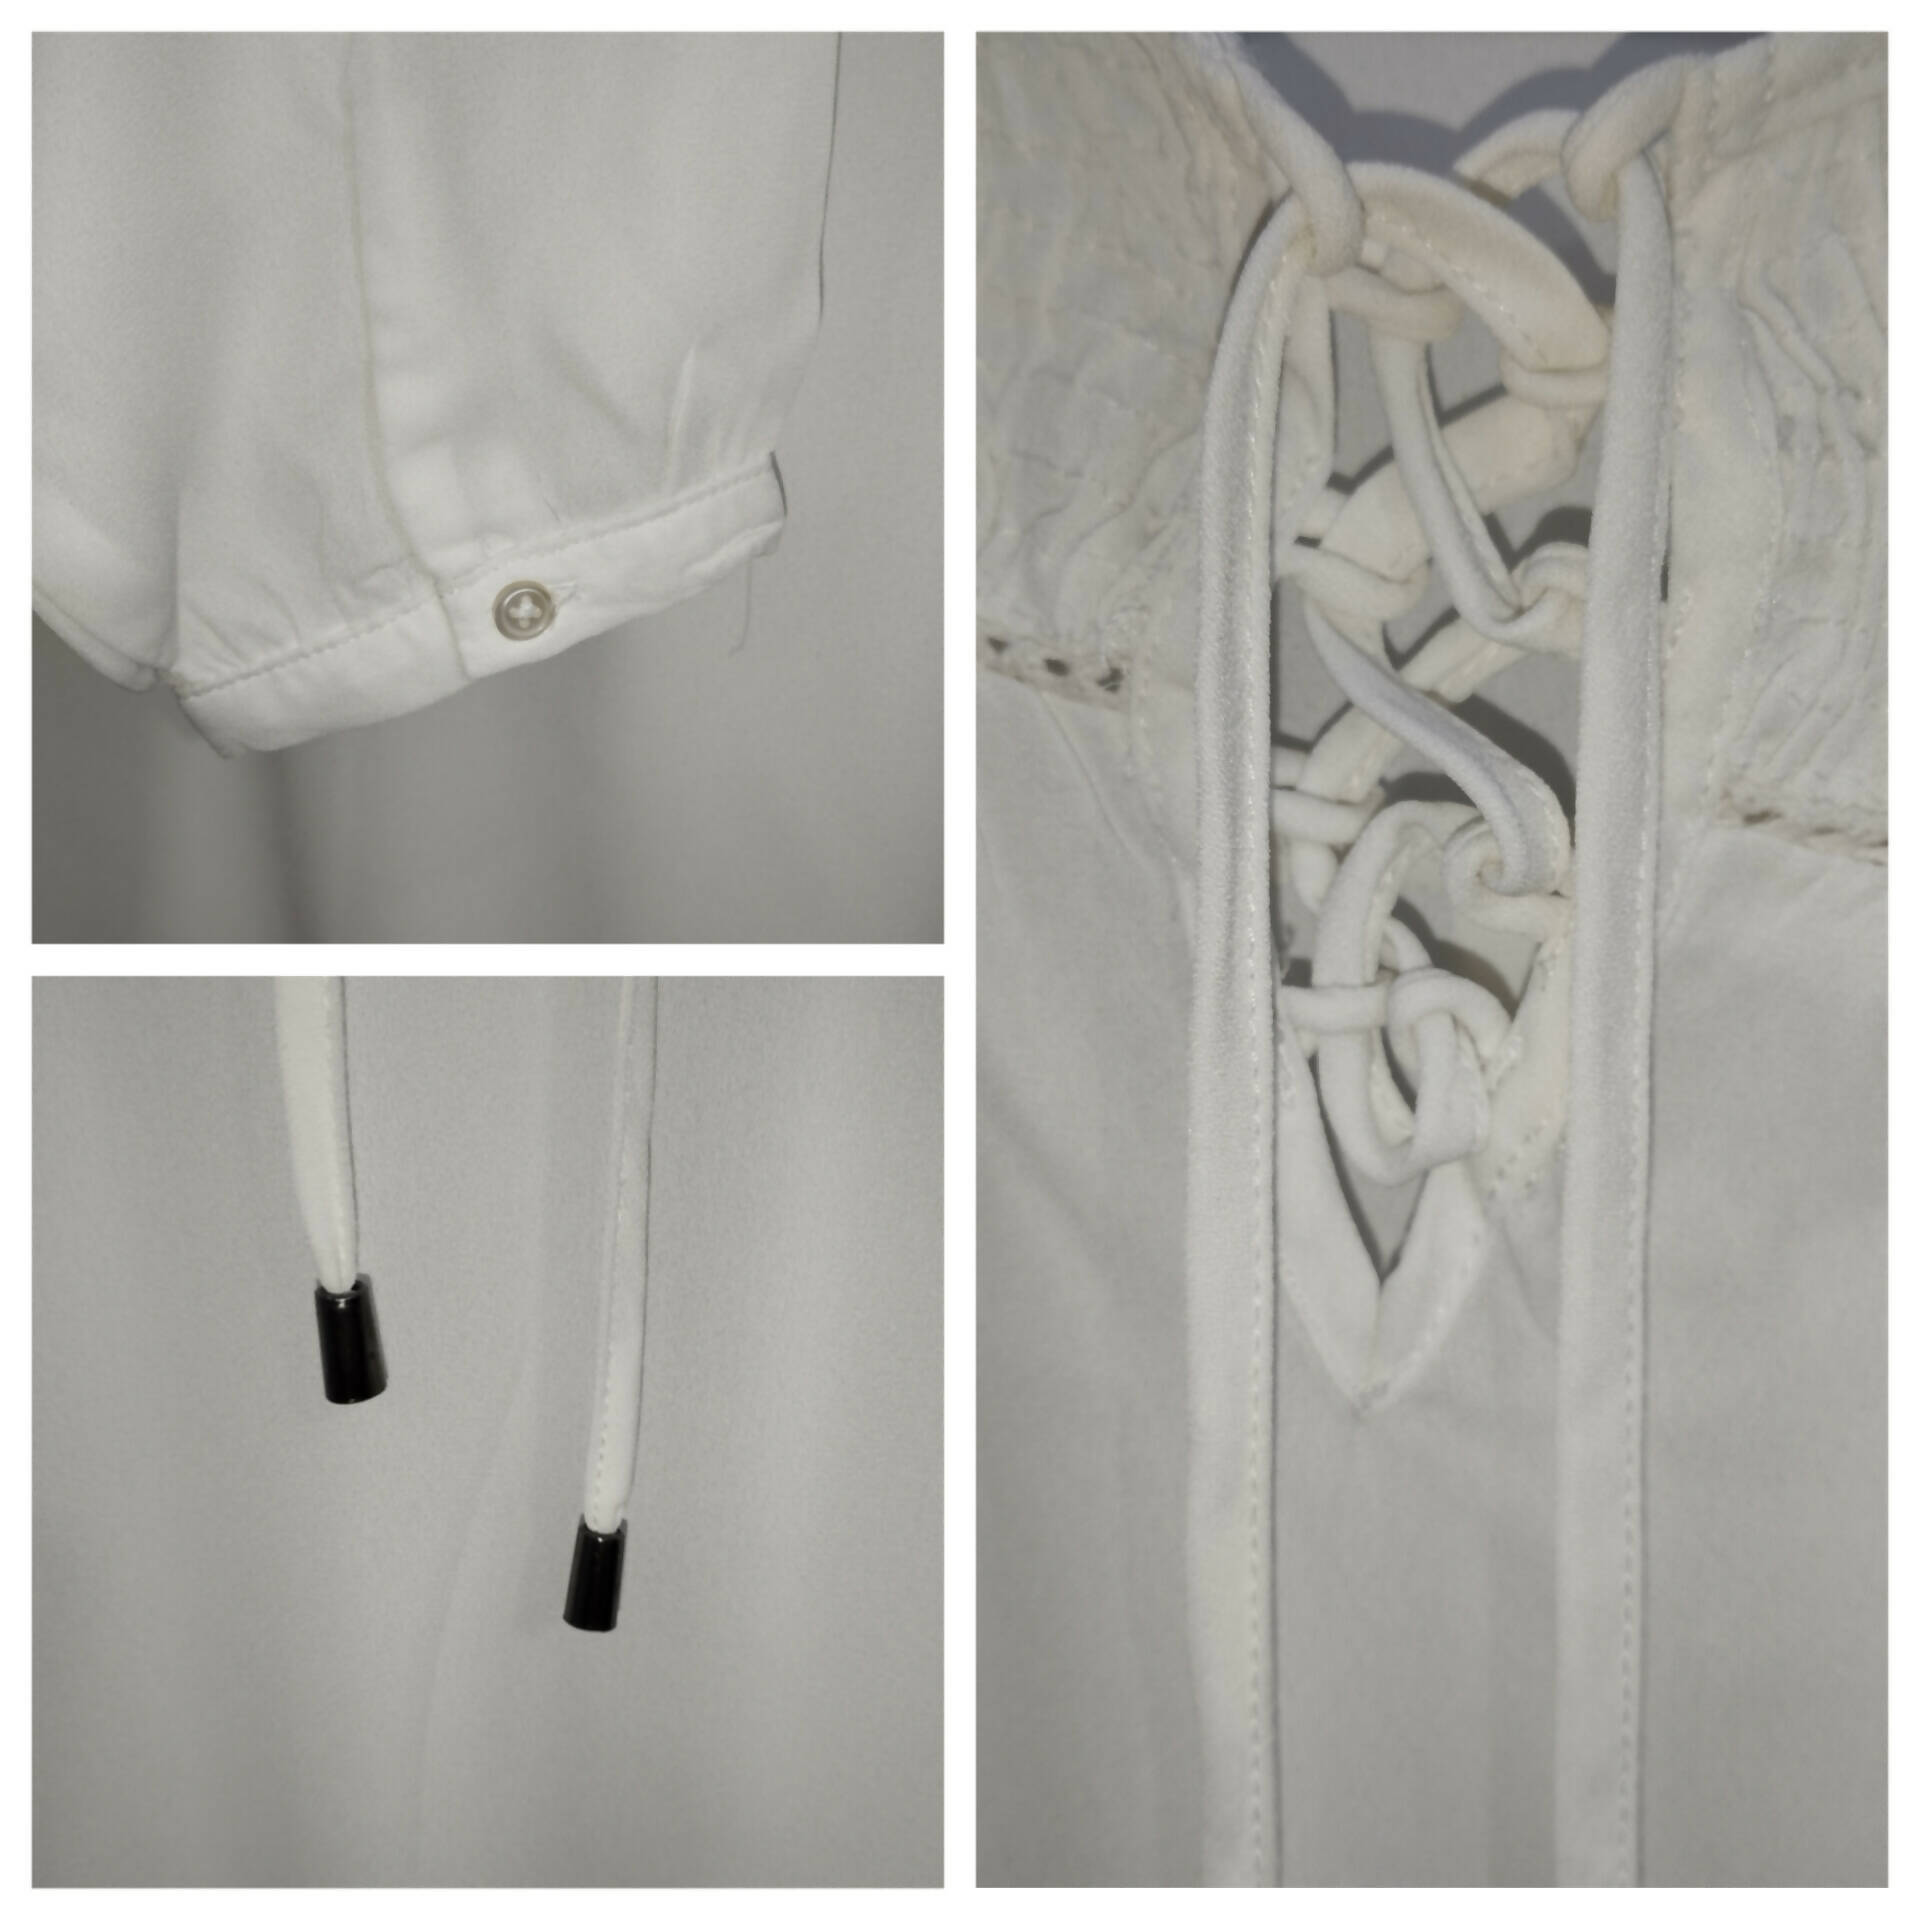 White Top (Size: M ) | Women Tops & Shirts | New